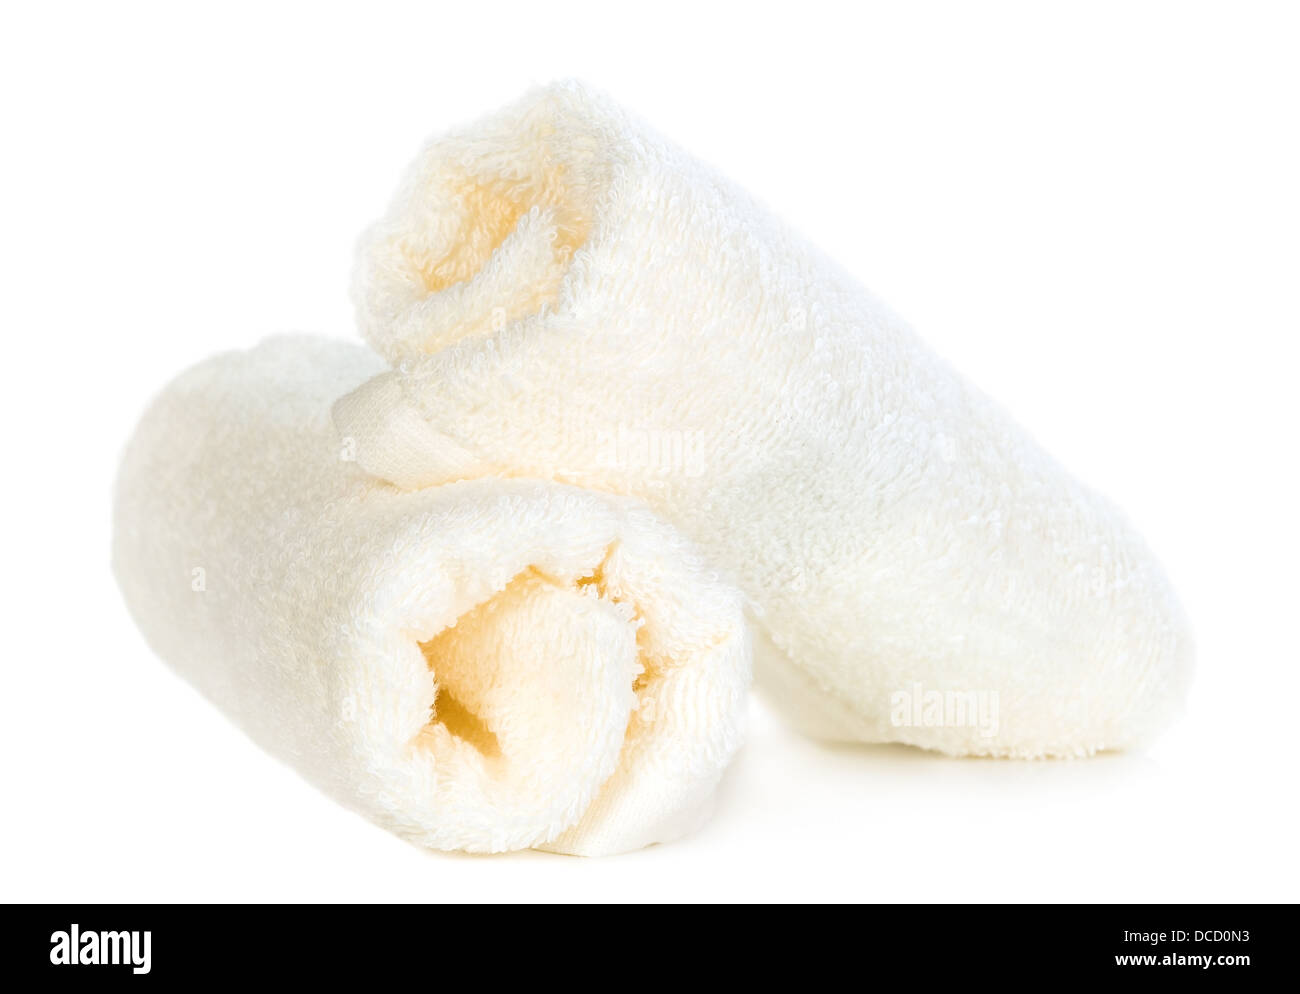 Rolled up white towels on isolated background Stock Photo